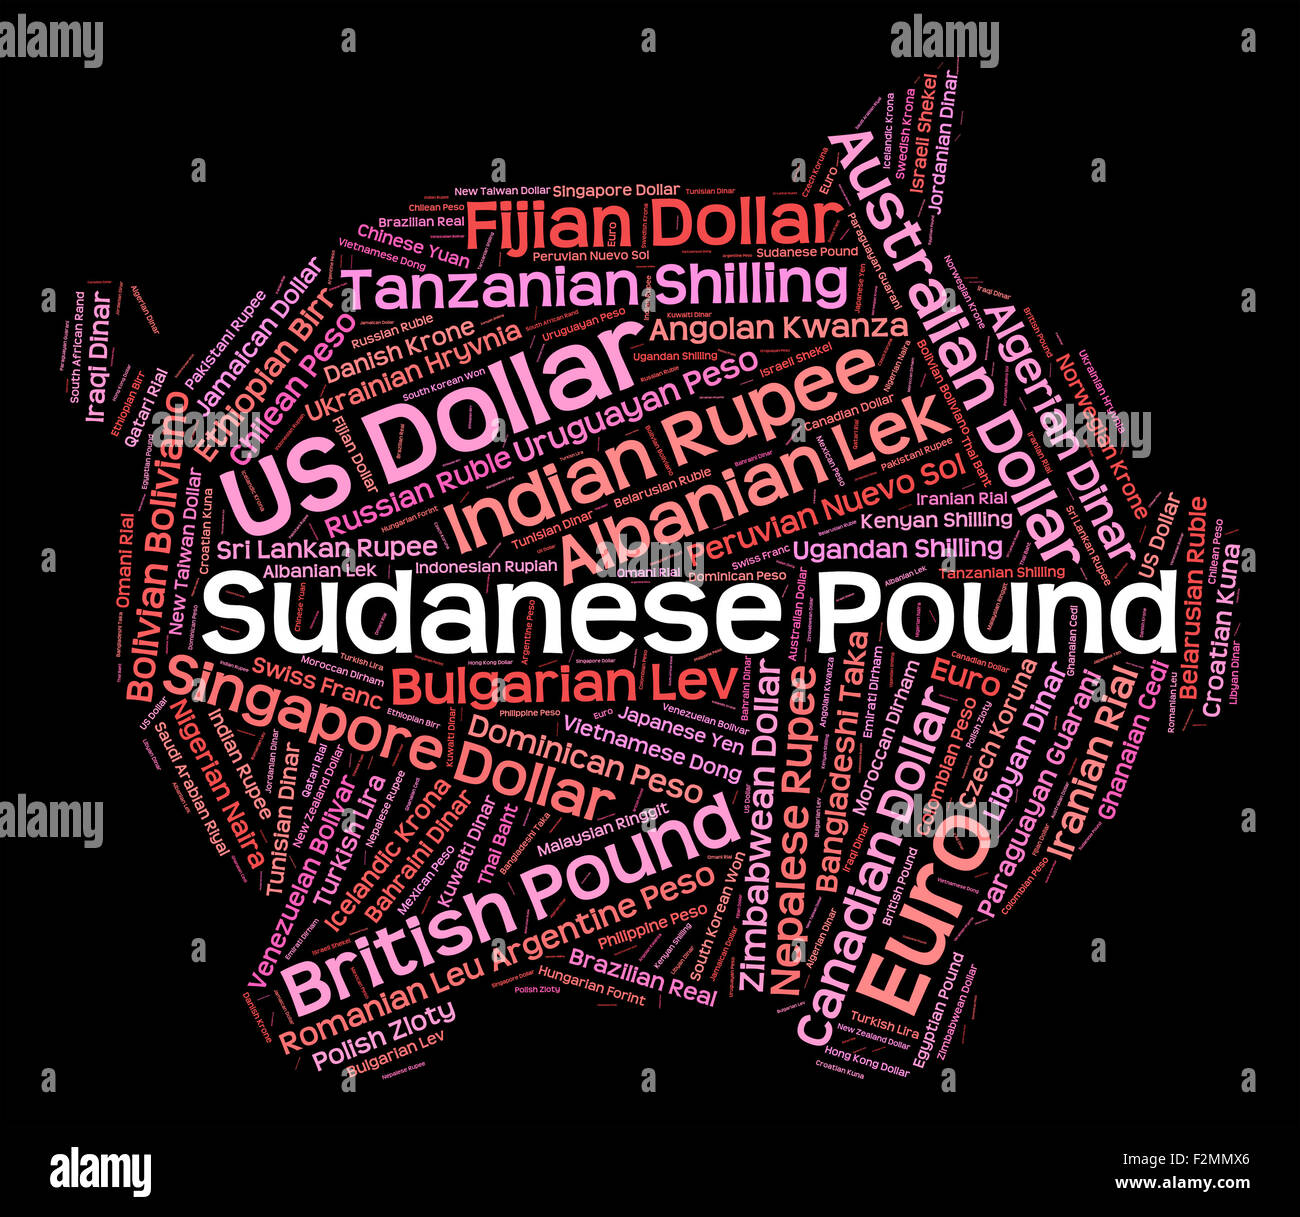 Sudanese Pound Meaning Worldwide Trading And Banknotes Stock Photo